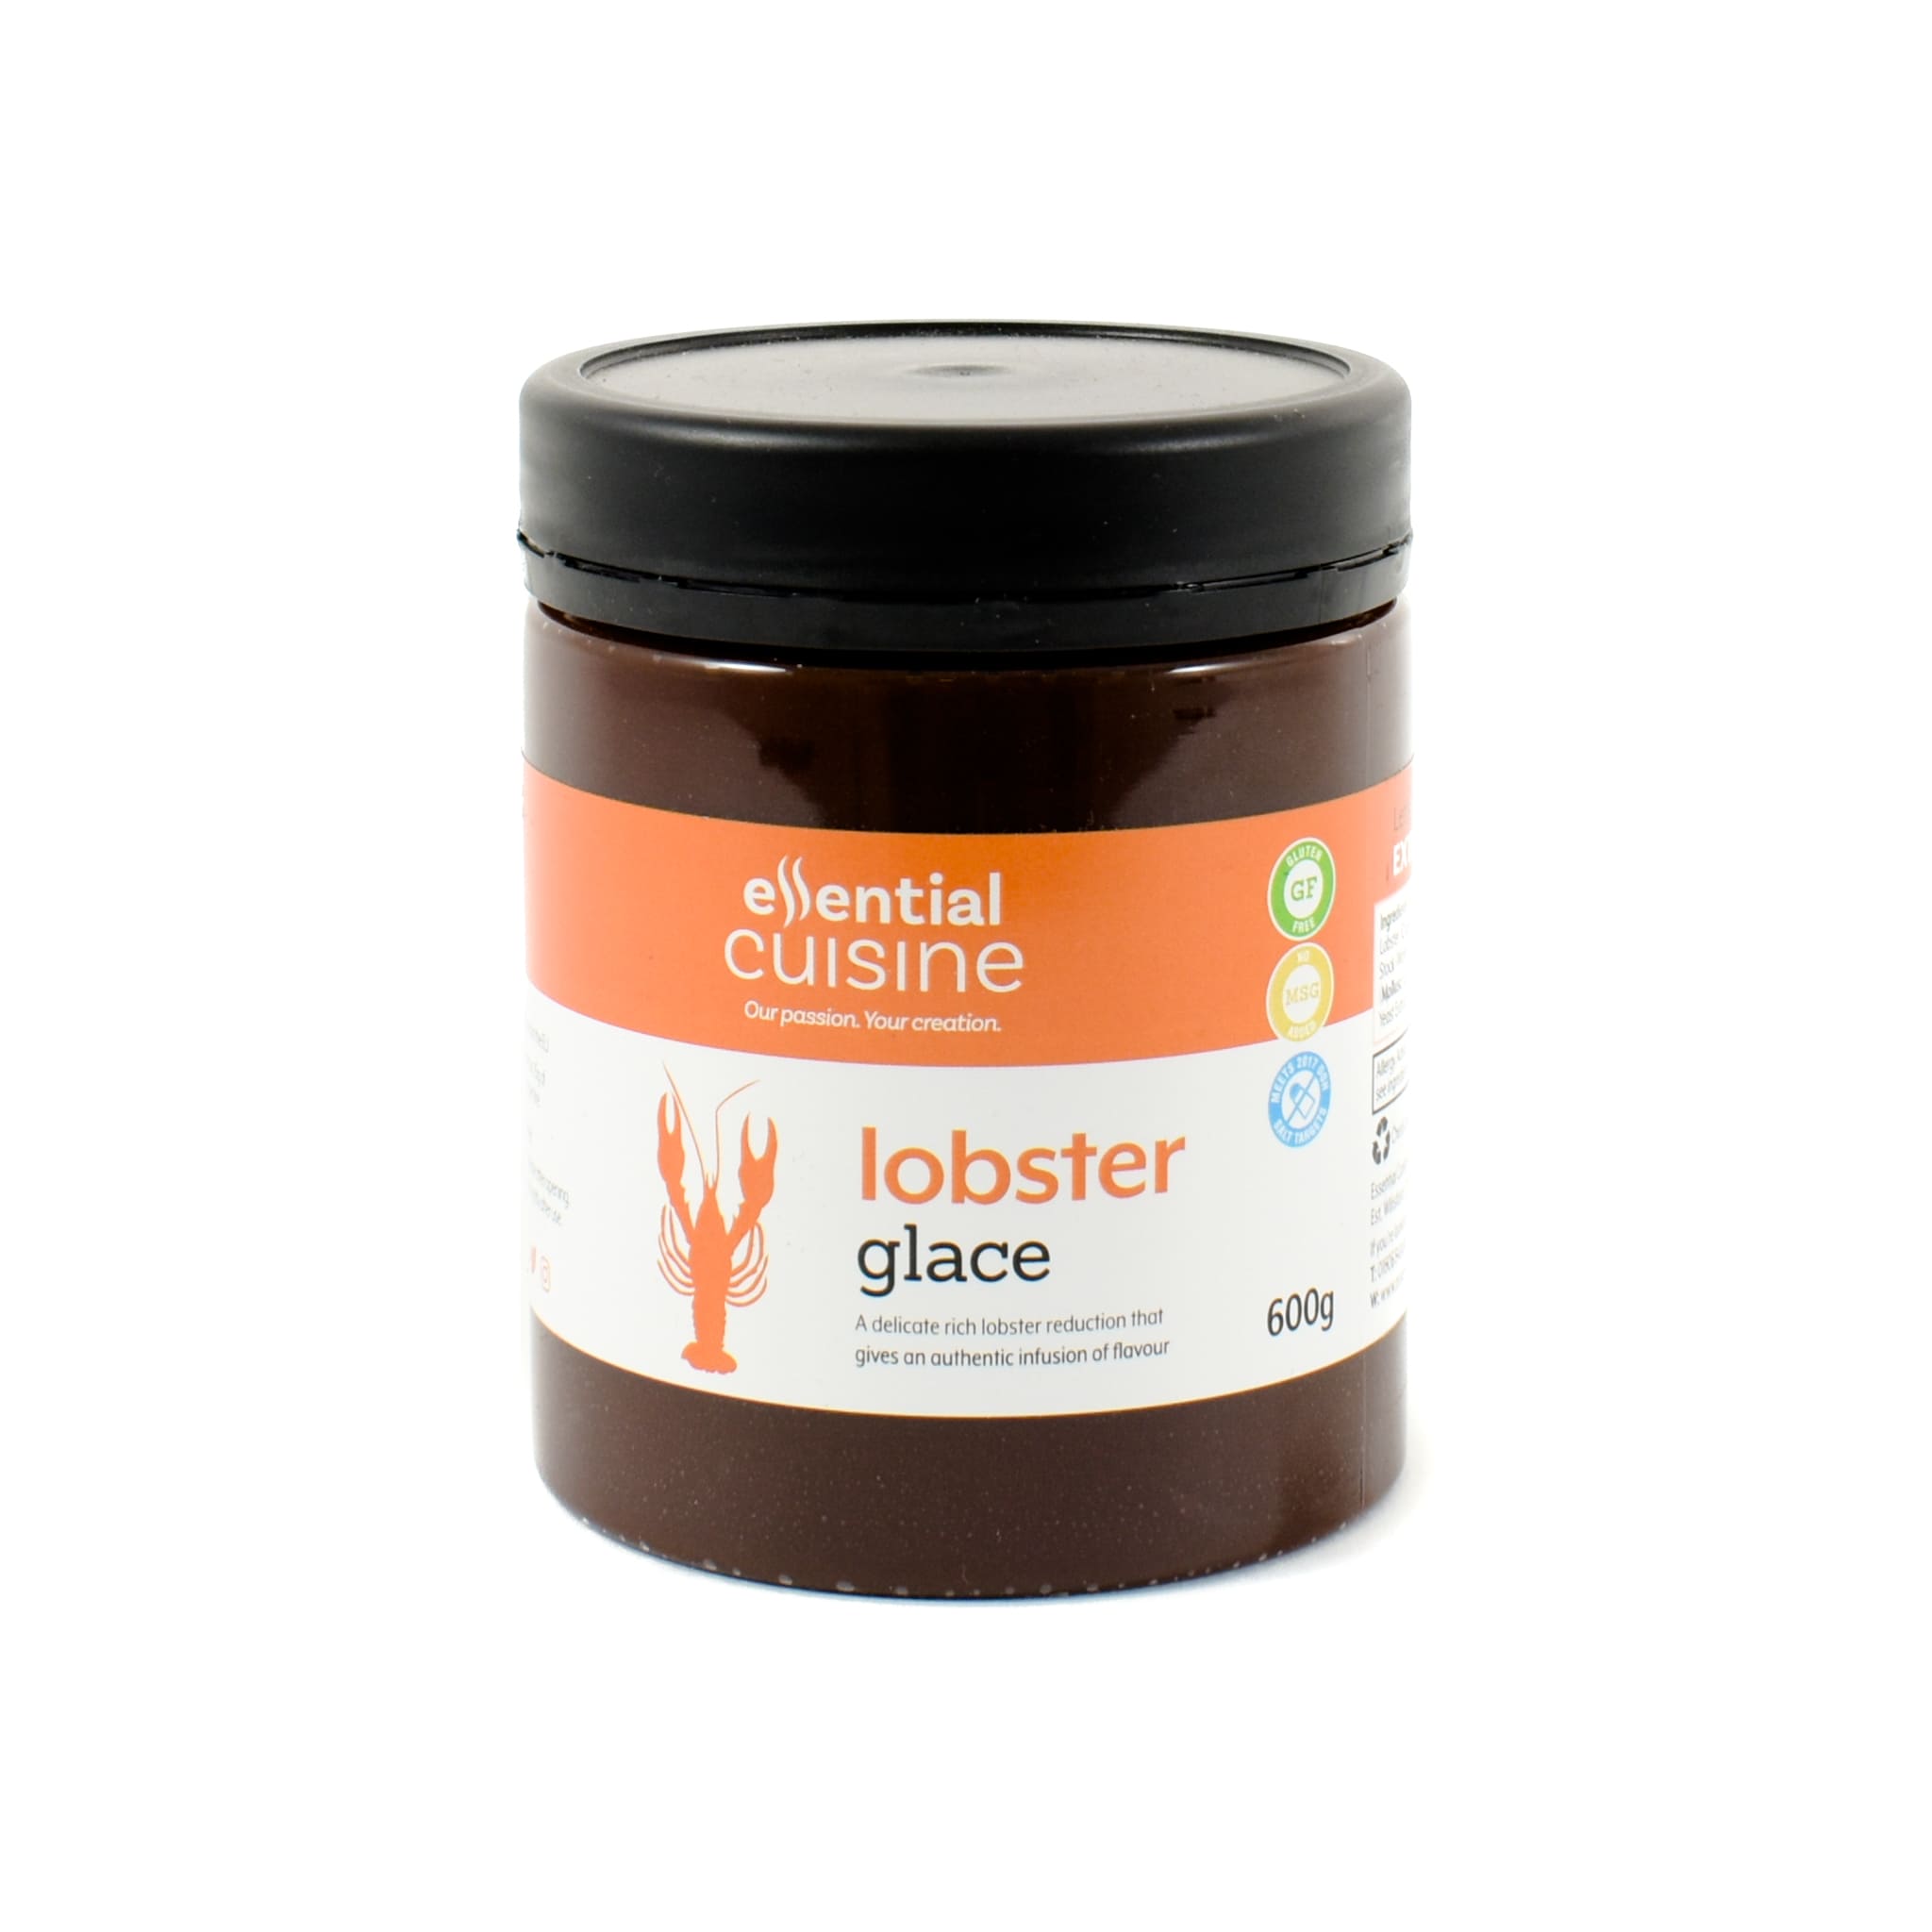 Essential Cuisine Lobster Glace, 600g